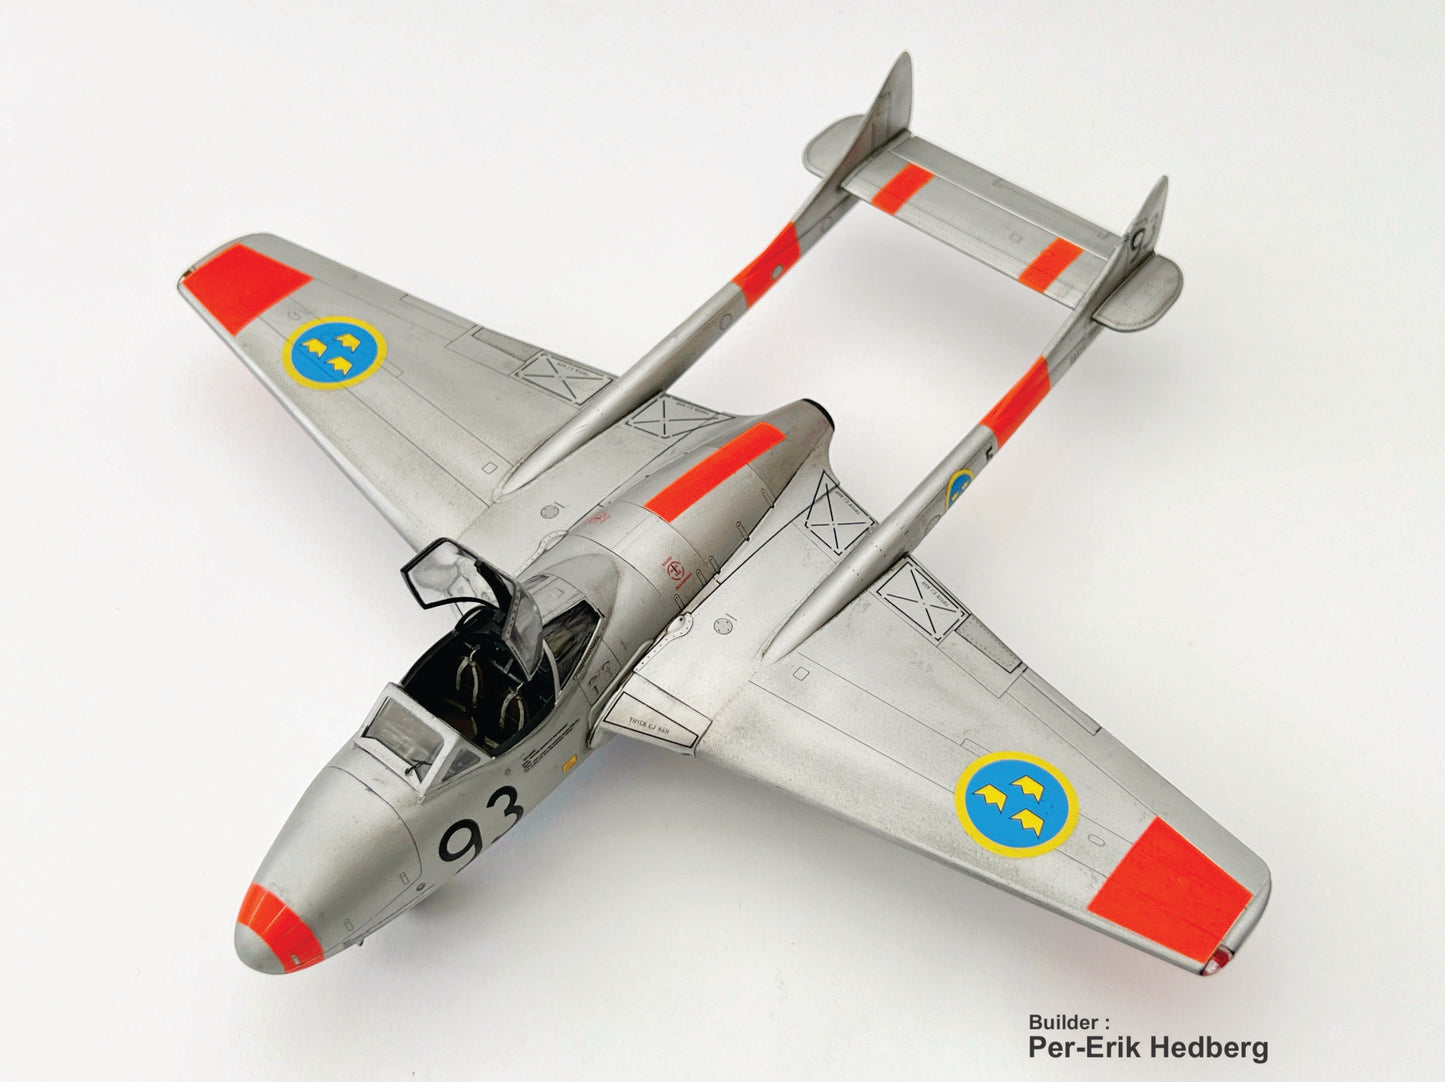 J28 C Vampire in Swedish Air Force, 1/48 scale. 48A006